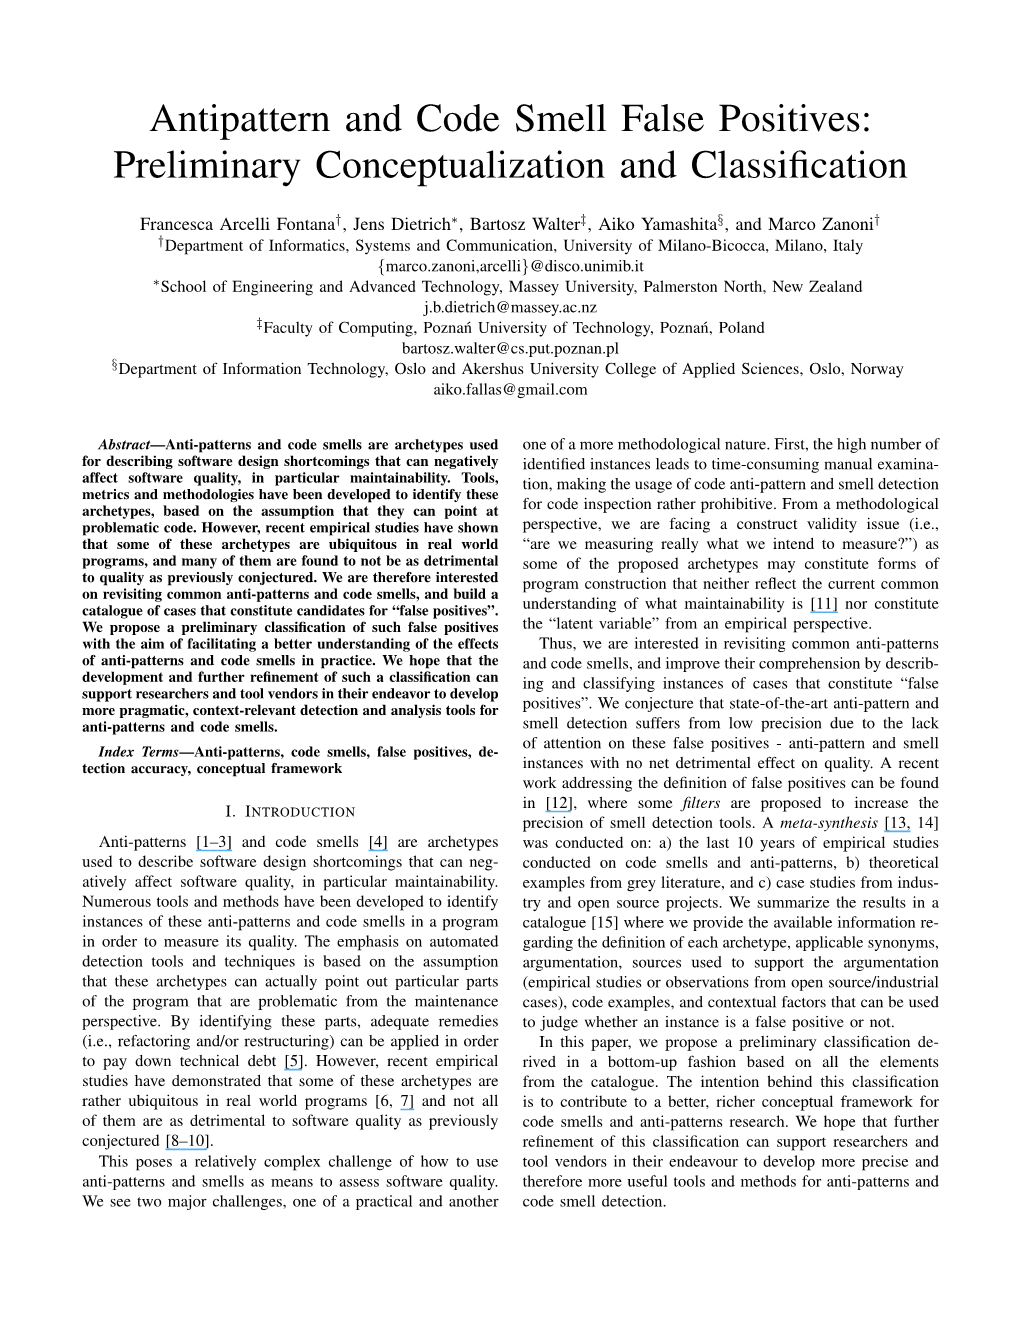 Antipattern and Code Smell False Positives: Preliminary Conceptualization and Classiﬁcation